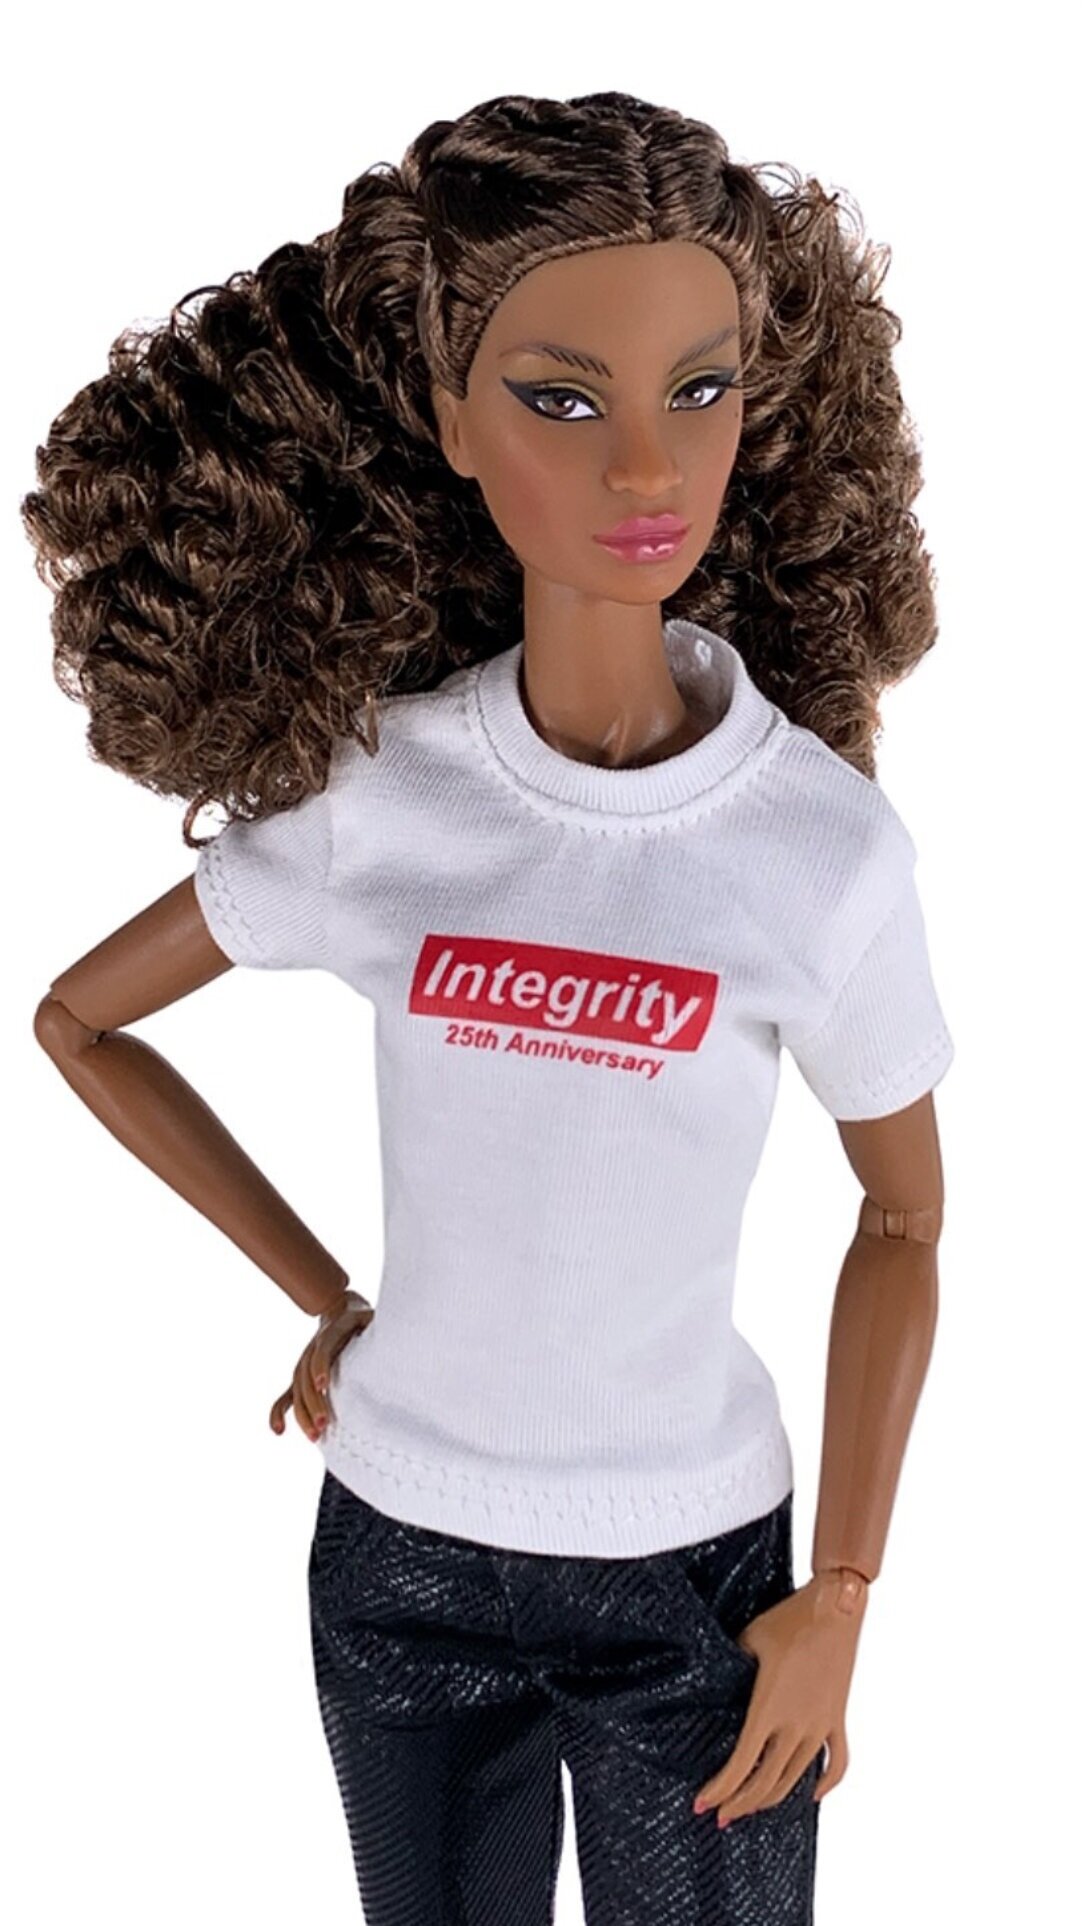 Janay_Carry_On_welcome_doll_Integrity_Toys_Convention_Legendary_image_t_shirt.jpg